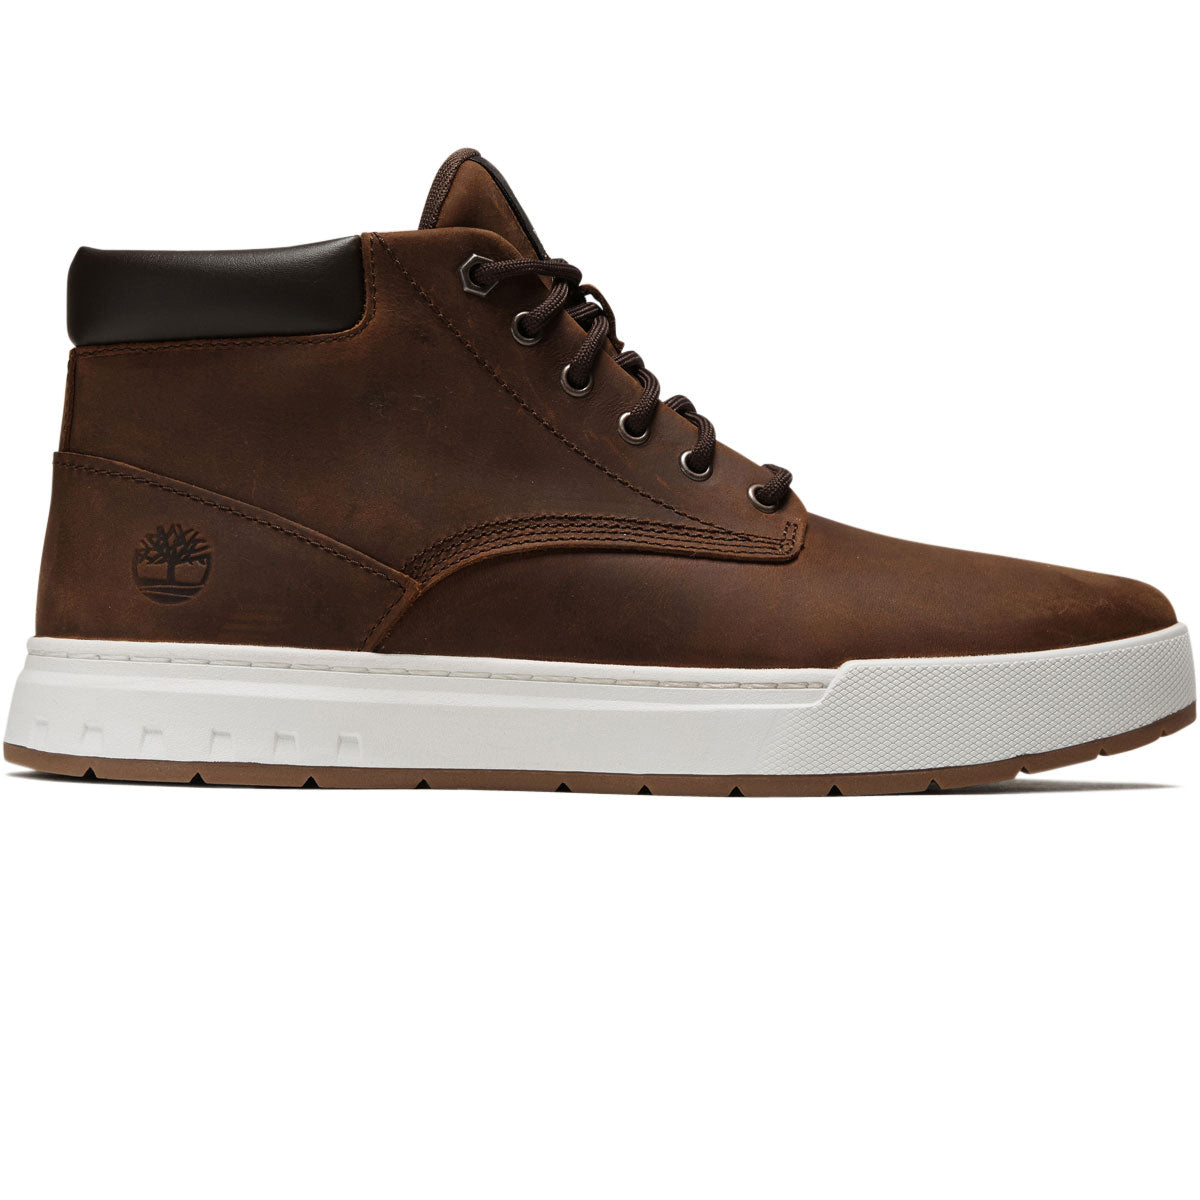 Timberland Maple Grove Leather Chukka Boots - Md Brown Full Grain – CCS